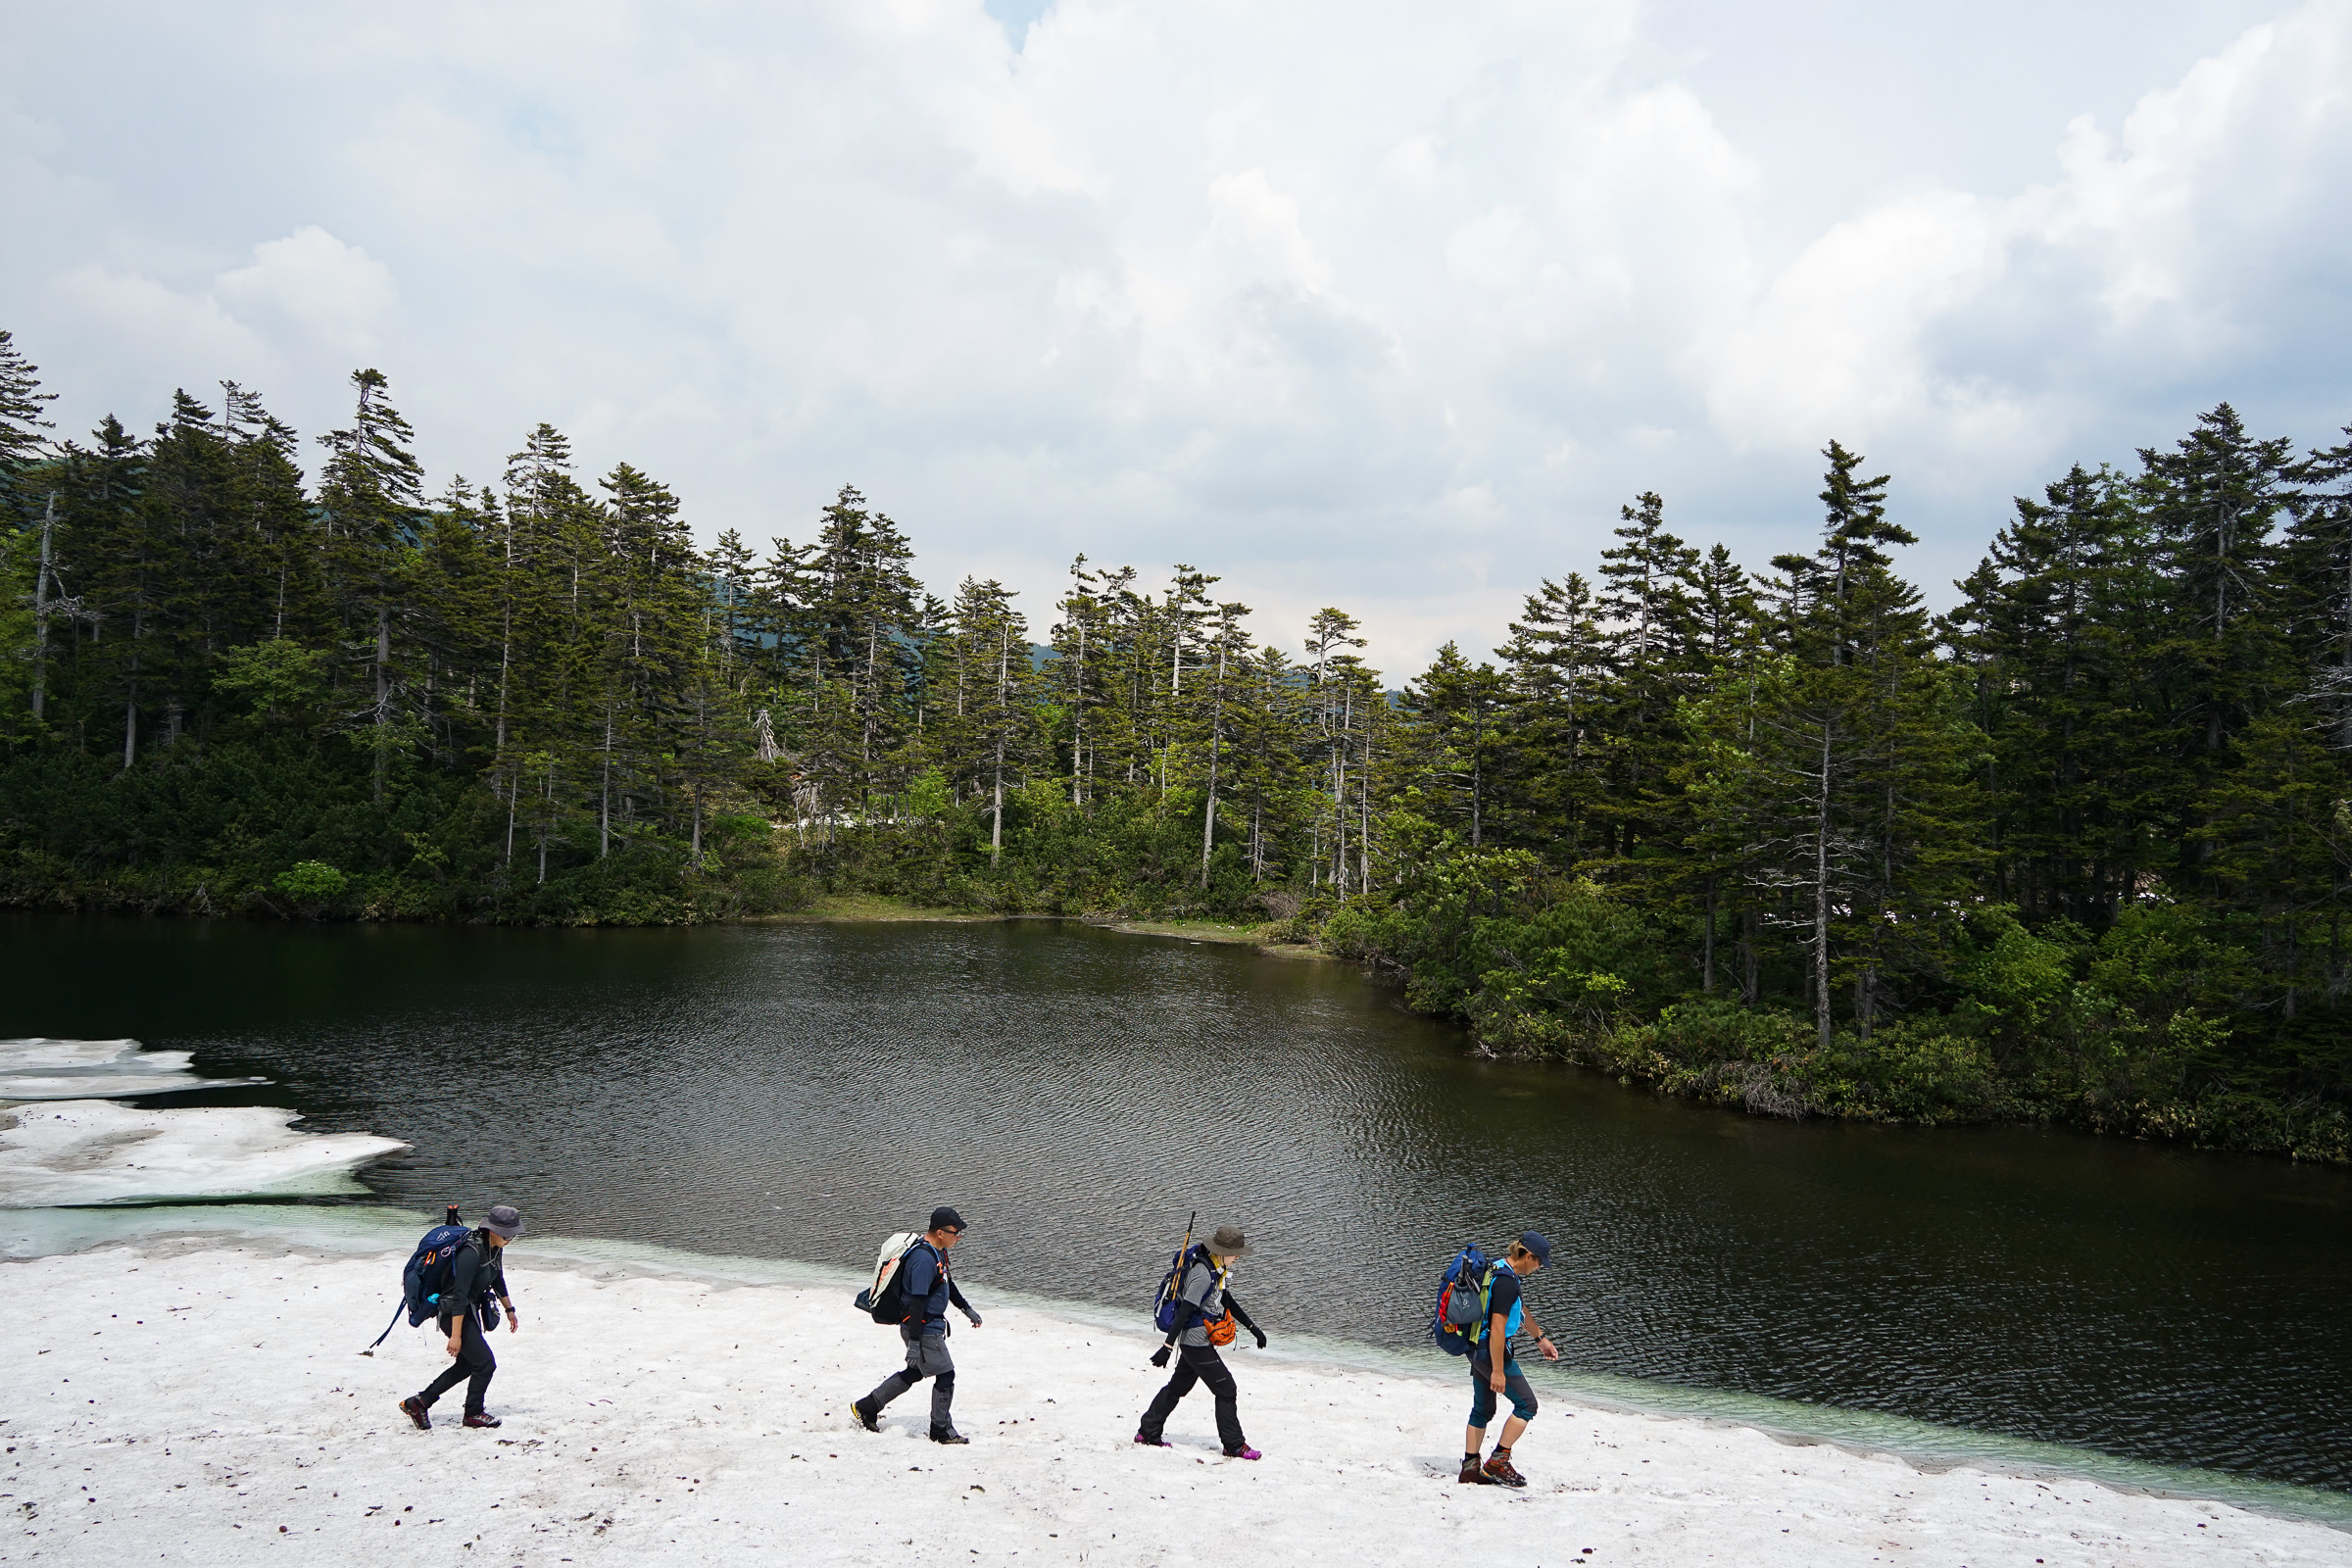 A group of hikers walk across a snowbank that sits next to an open pond in the Daisetsuzan National Park. The green trees behind the pond contrast with the white snow.